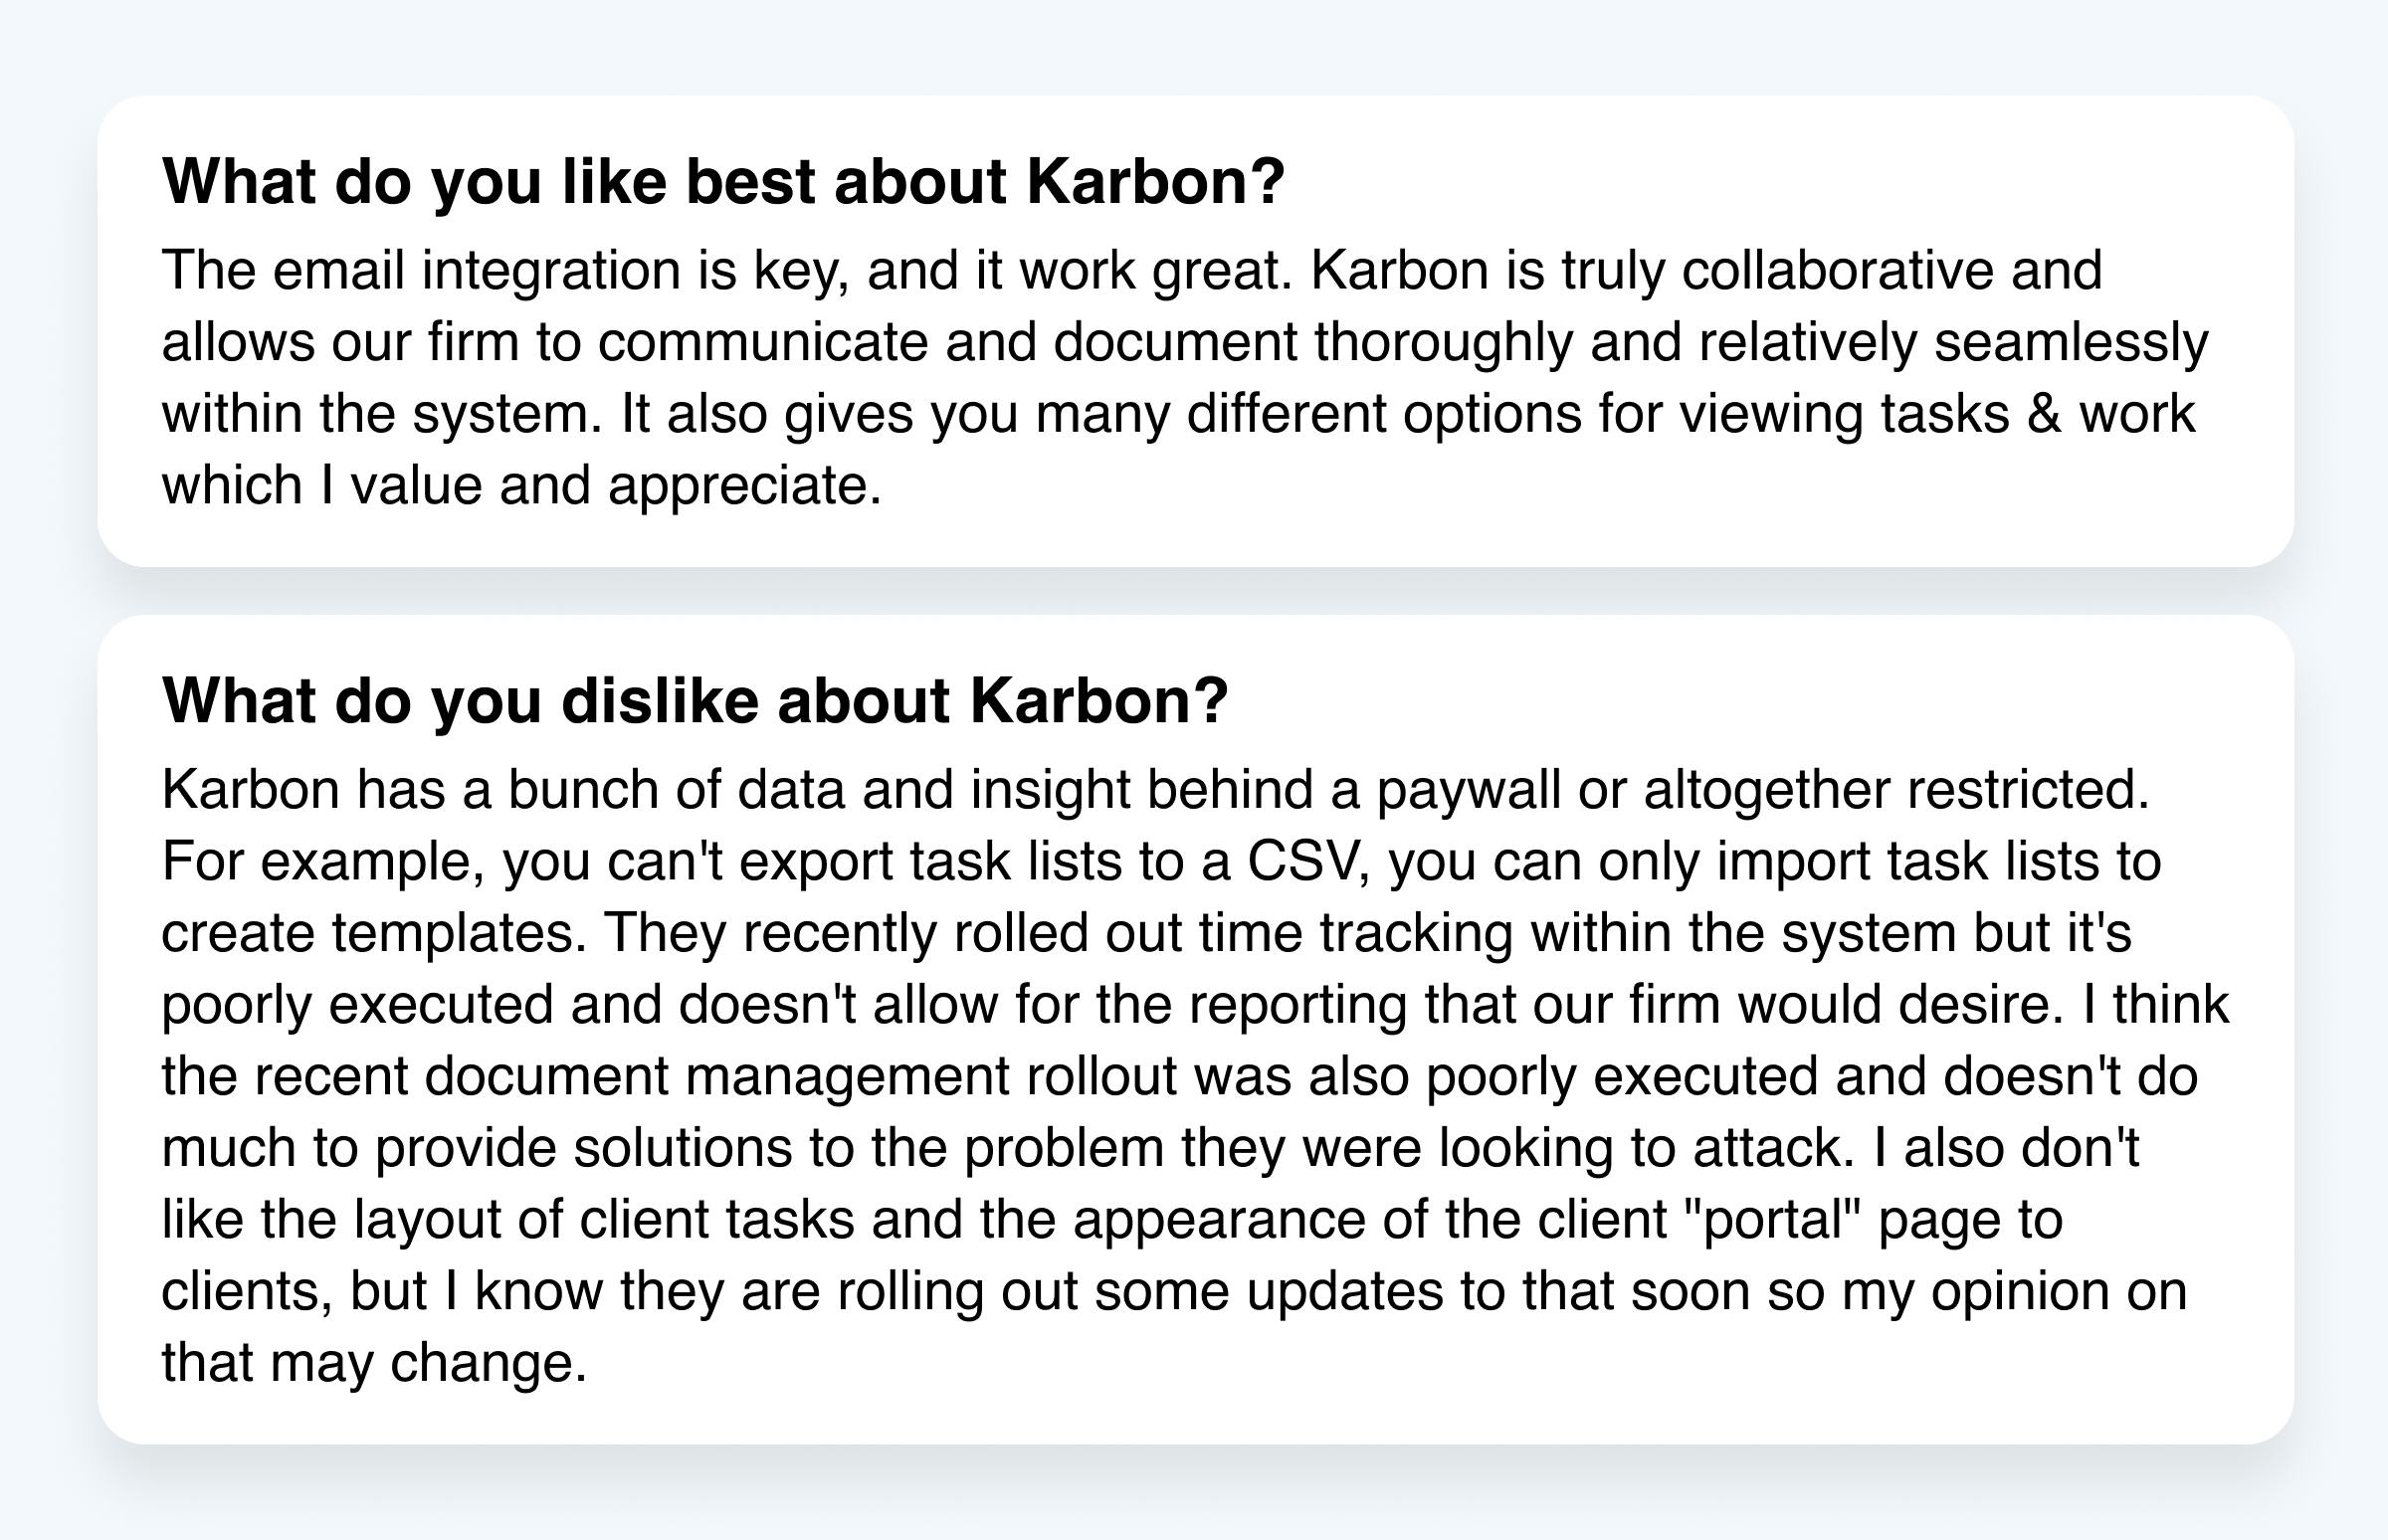 Screenshot of a user review listing things they like and dislike about Karbon.